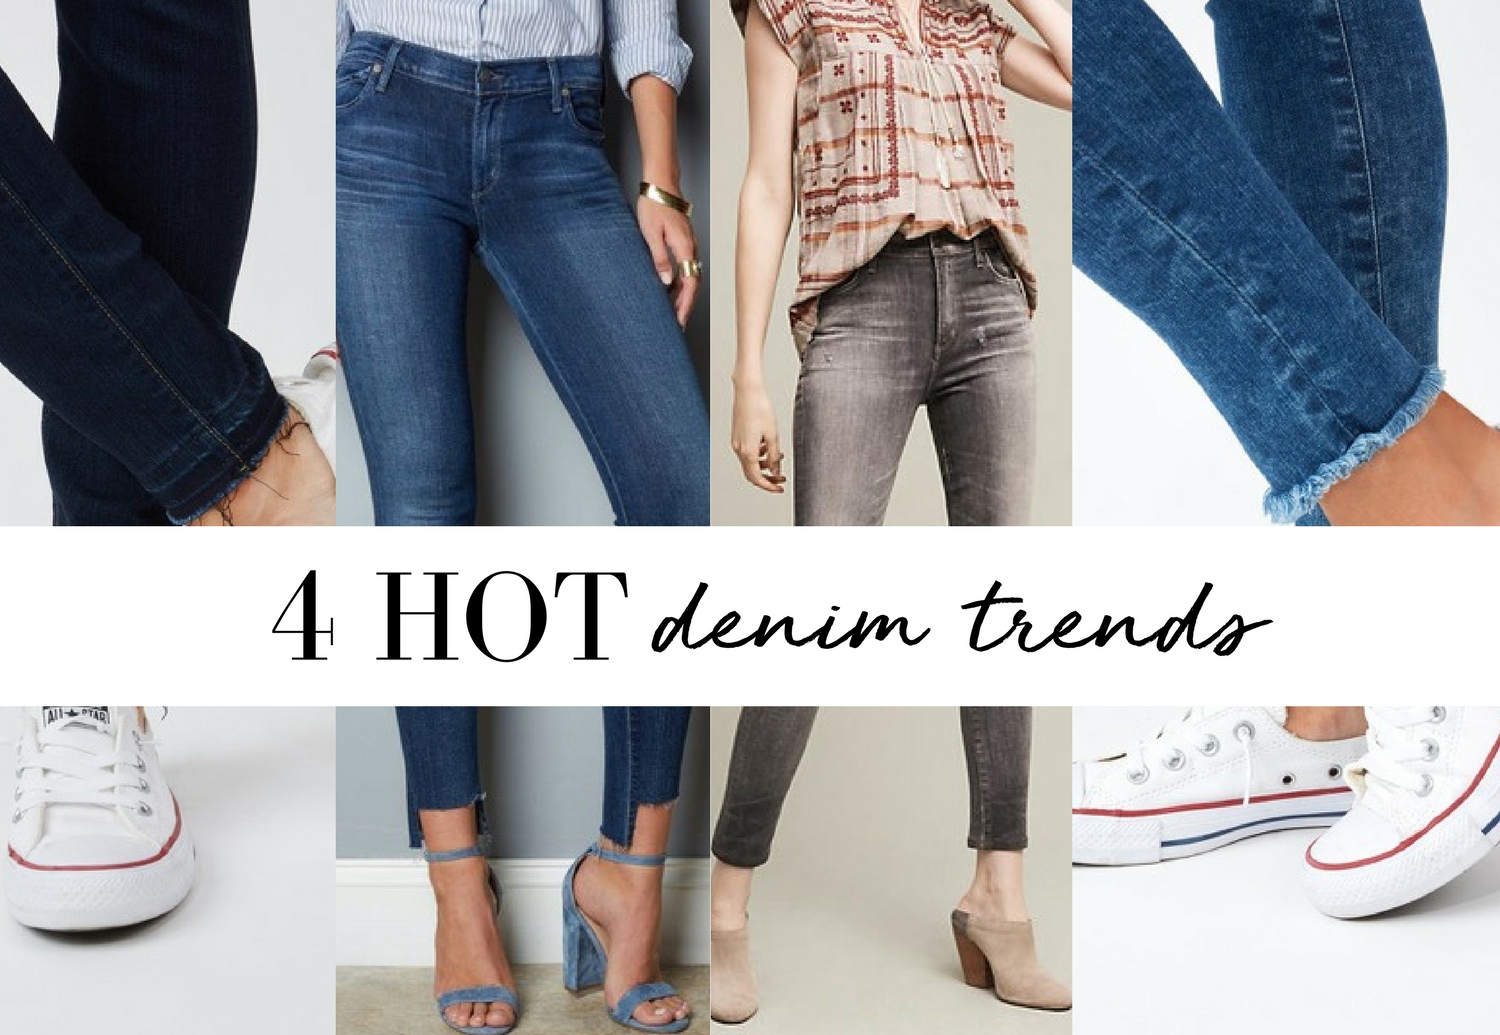 These 4 Denim Trends are Heading Your Way